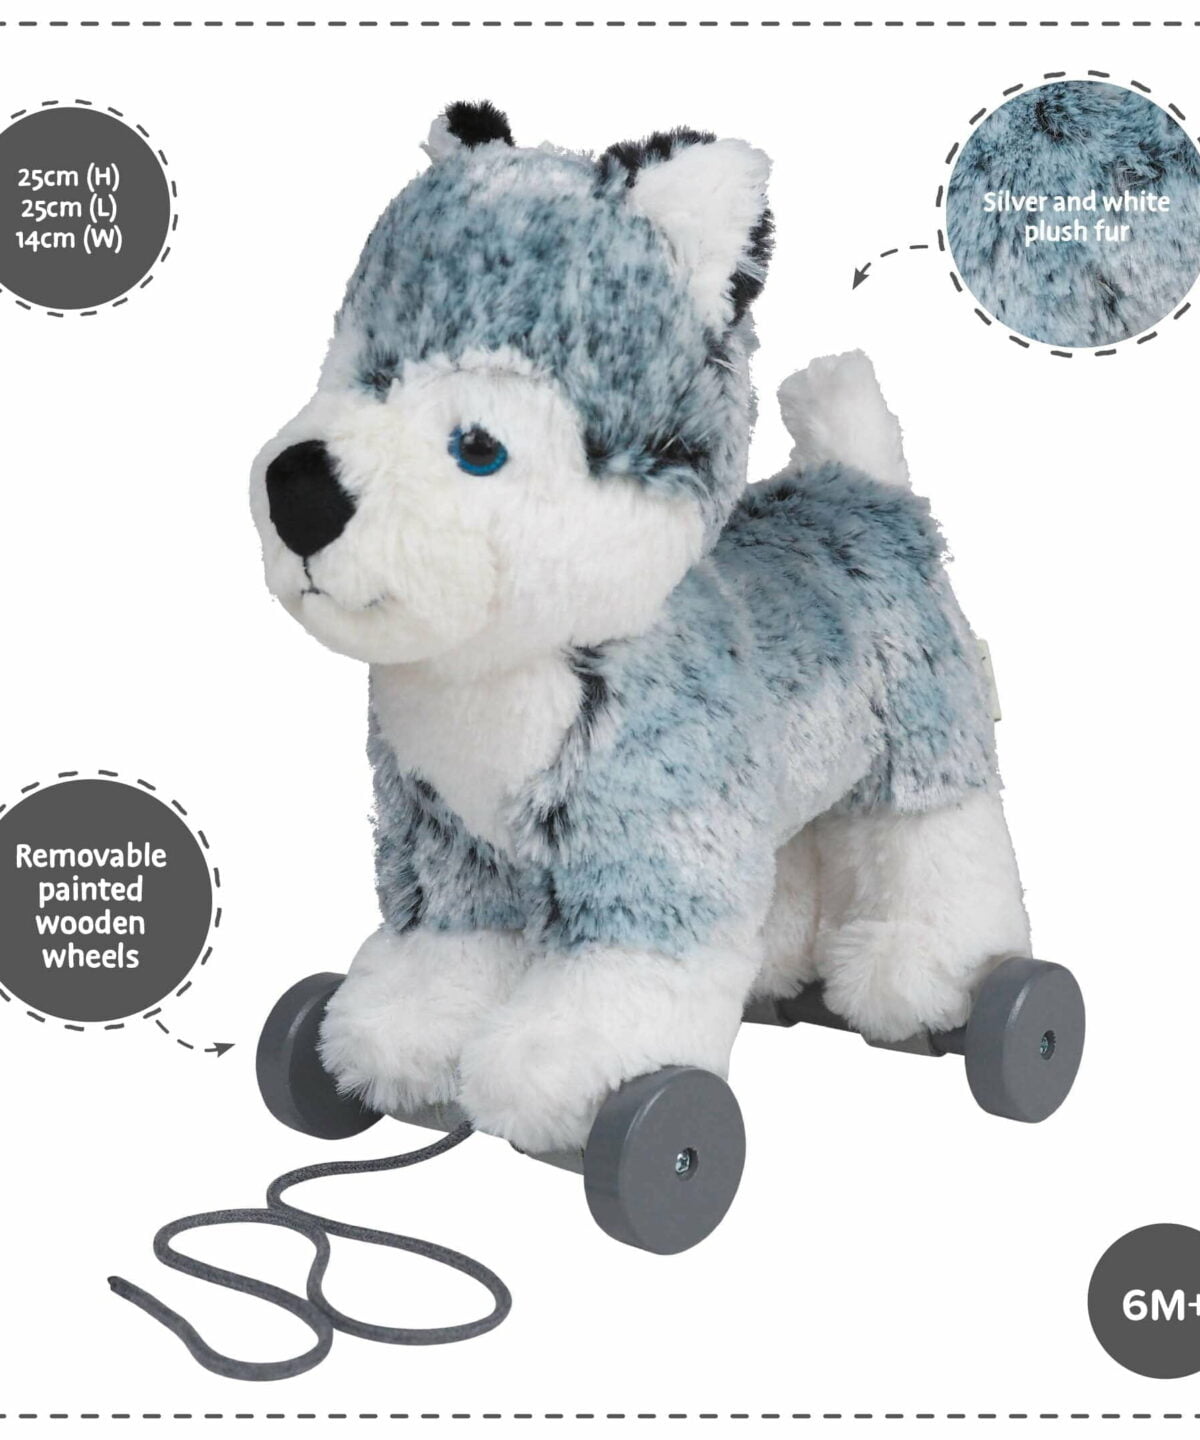 Features and benefits displayed for Mishka Dog Pull Along Toy